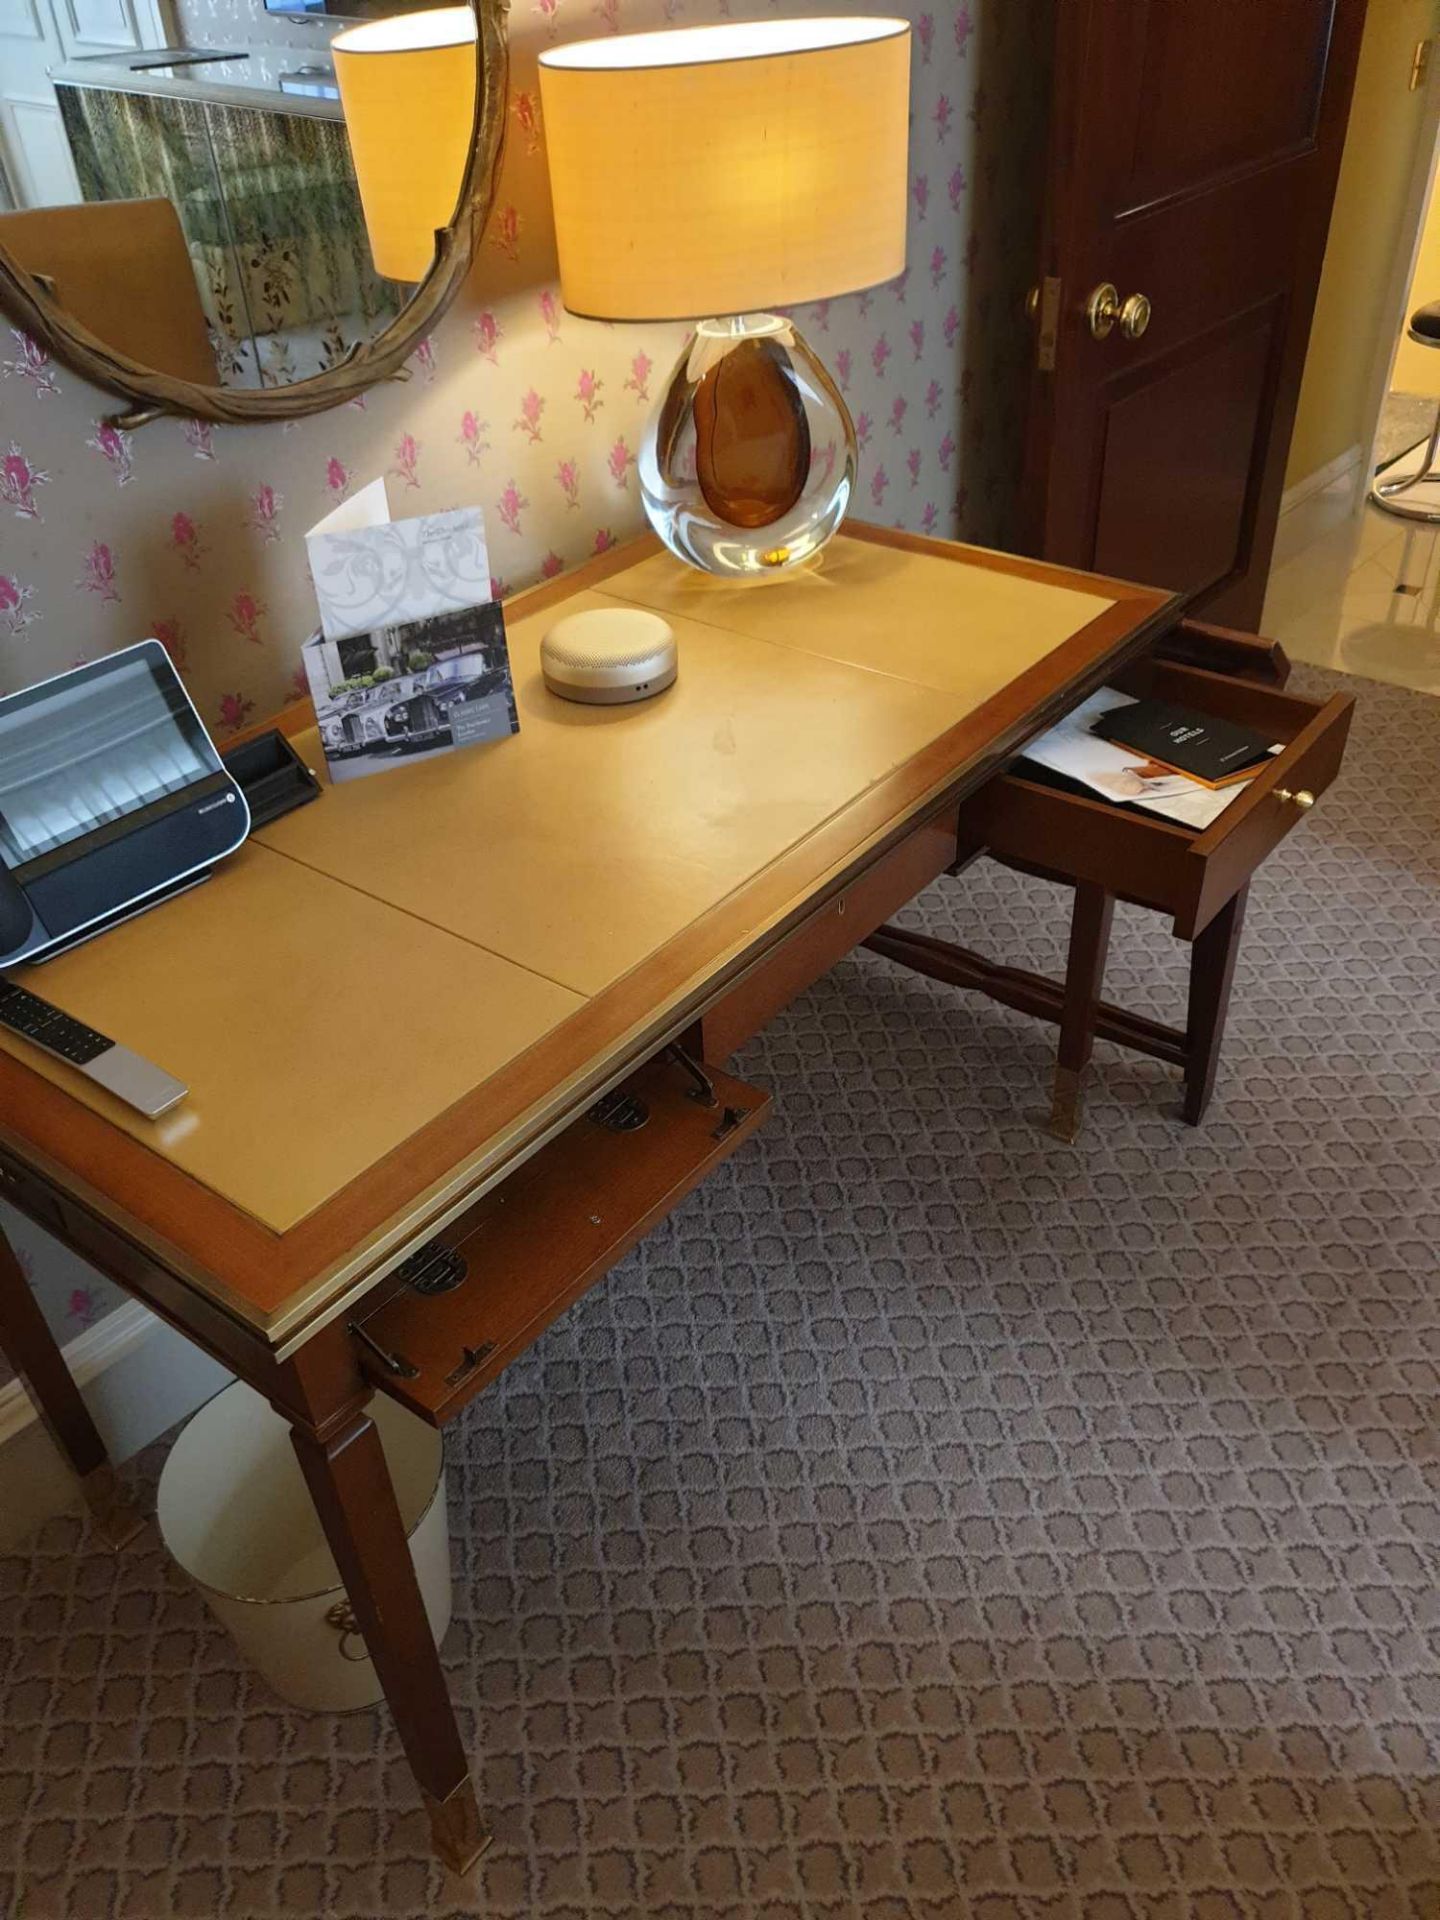 Writing Desk With Tooled Leather Inlay Faux Central Drawer Flanked By Single Drawer And Flap - Image 2 of 2